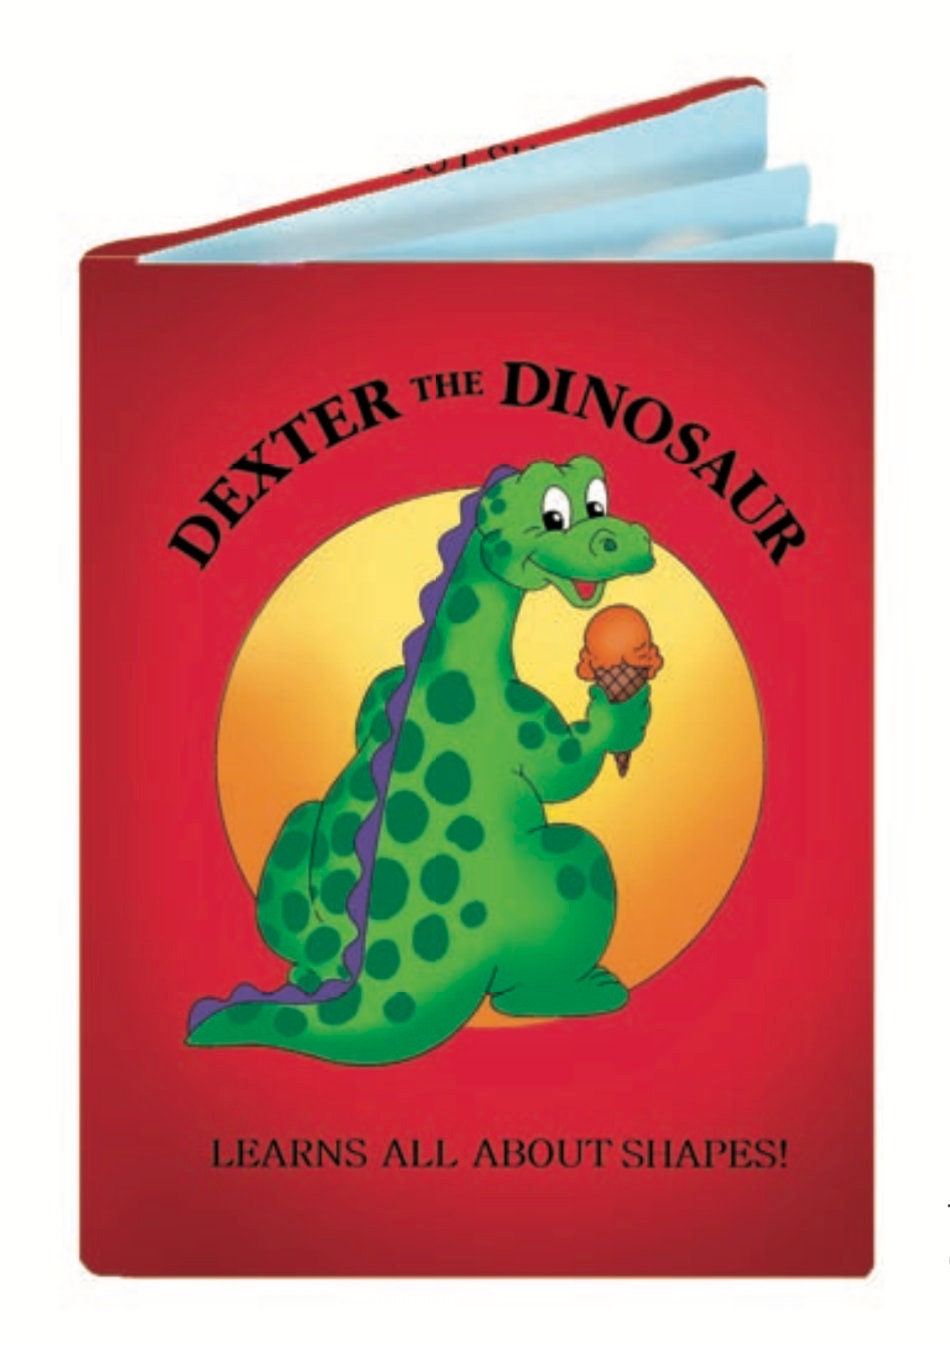 Sew N Go IX 36" Panel Dexter the Dinosaur Learns about Shapes 27279X Cotton Woven Fabric